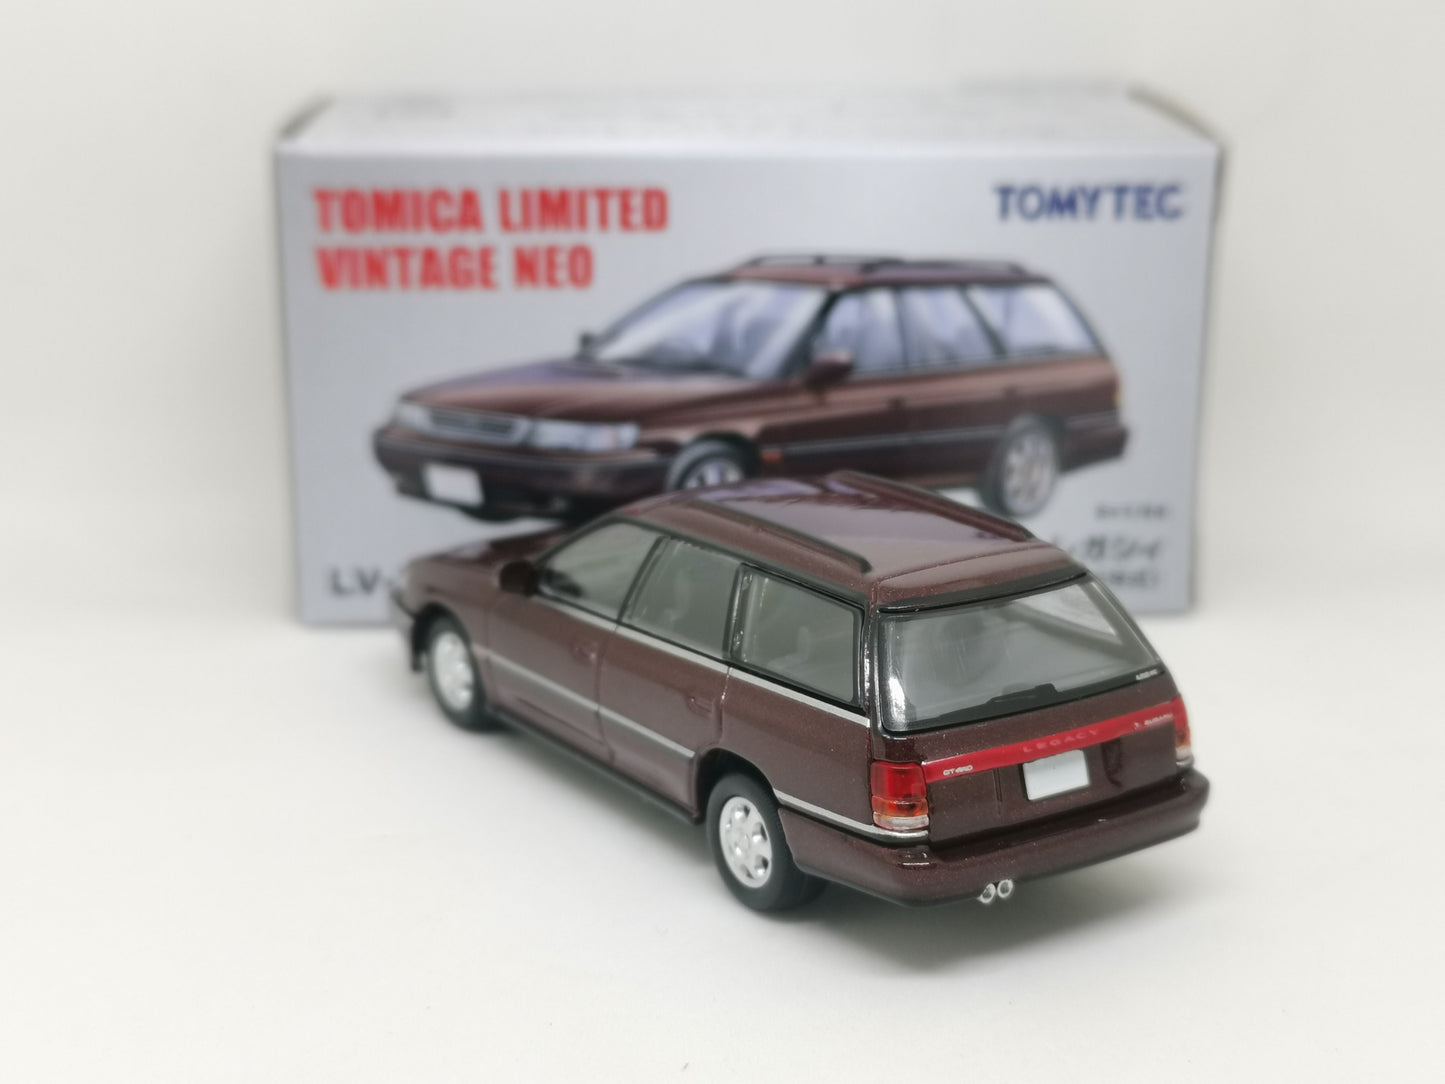 Tomica Limited Vintage Neo Subaru Legacy Touring Wagon GT LV-N201a